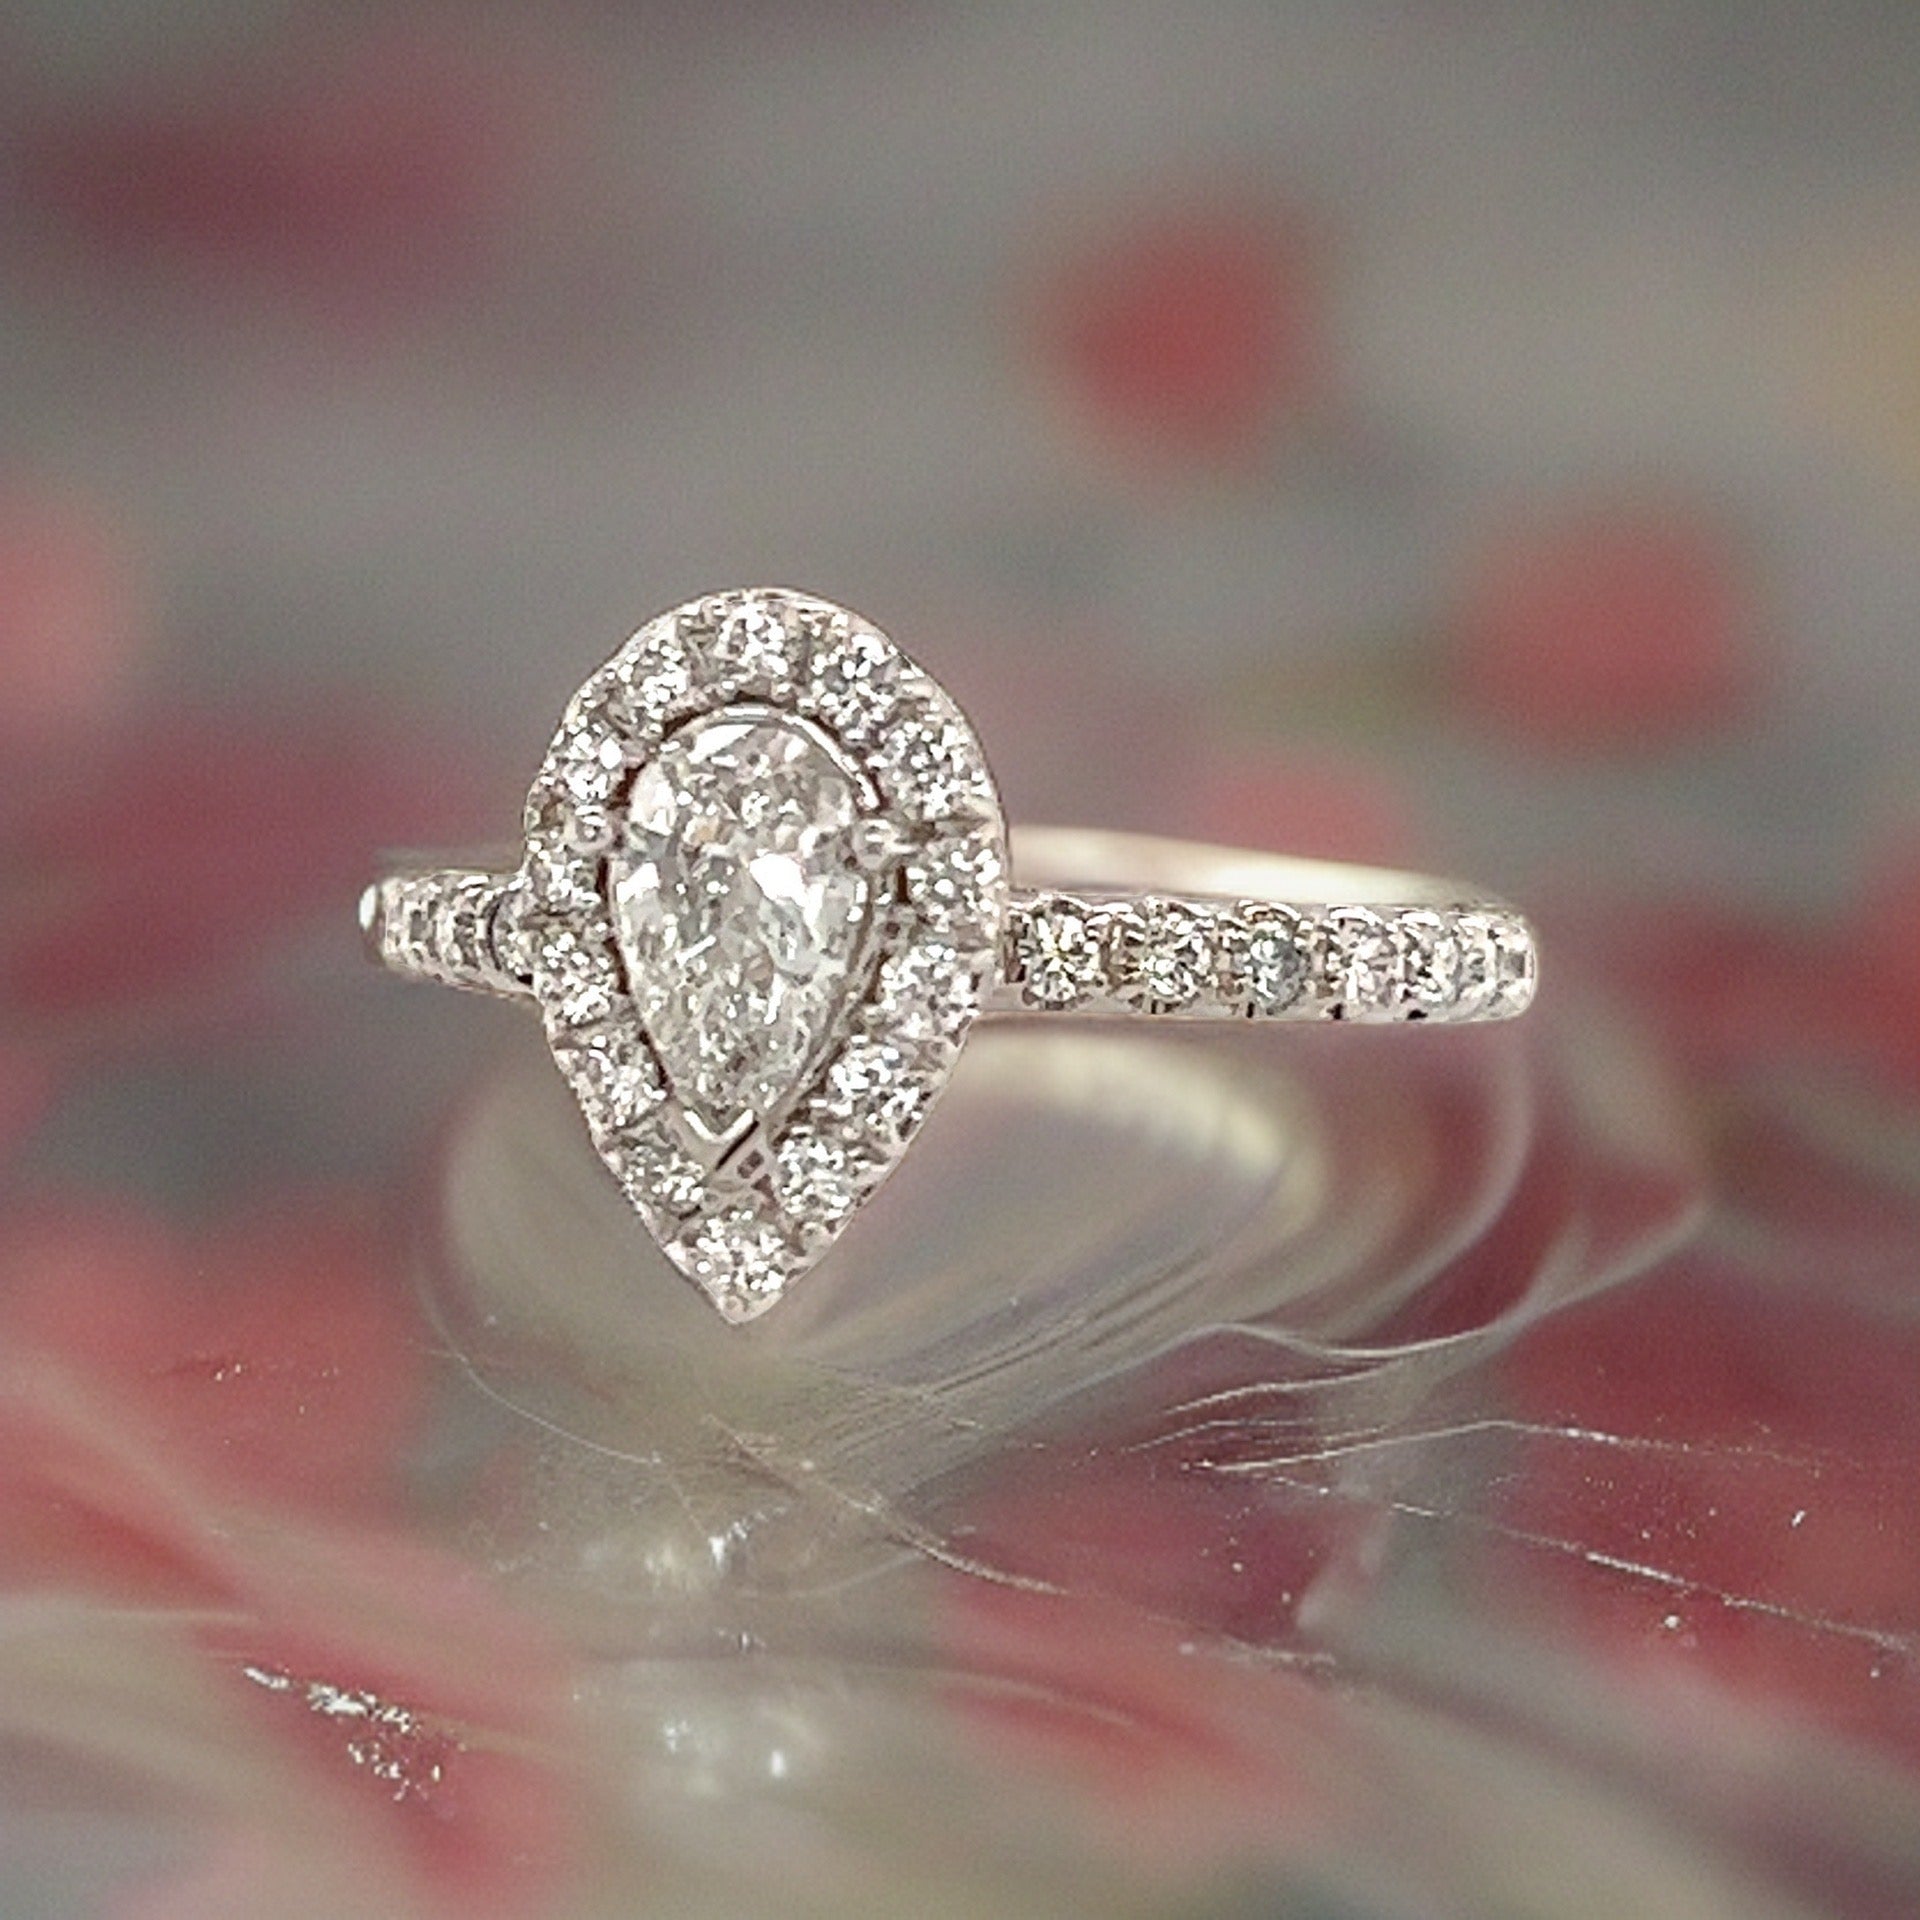 Diamond Engagement Ring 14k White Gold 0.90 TCW Certified $4,950 210736 - Certified Fine Jewelry